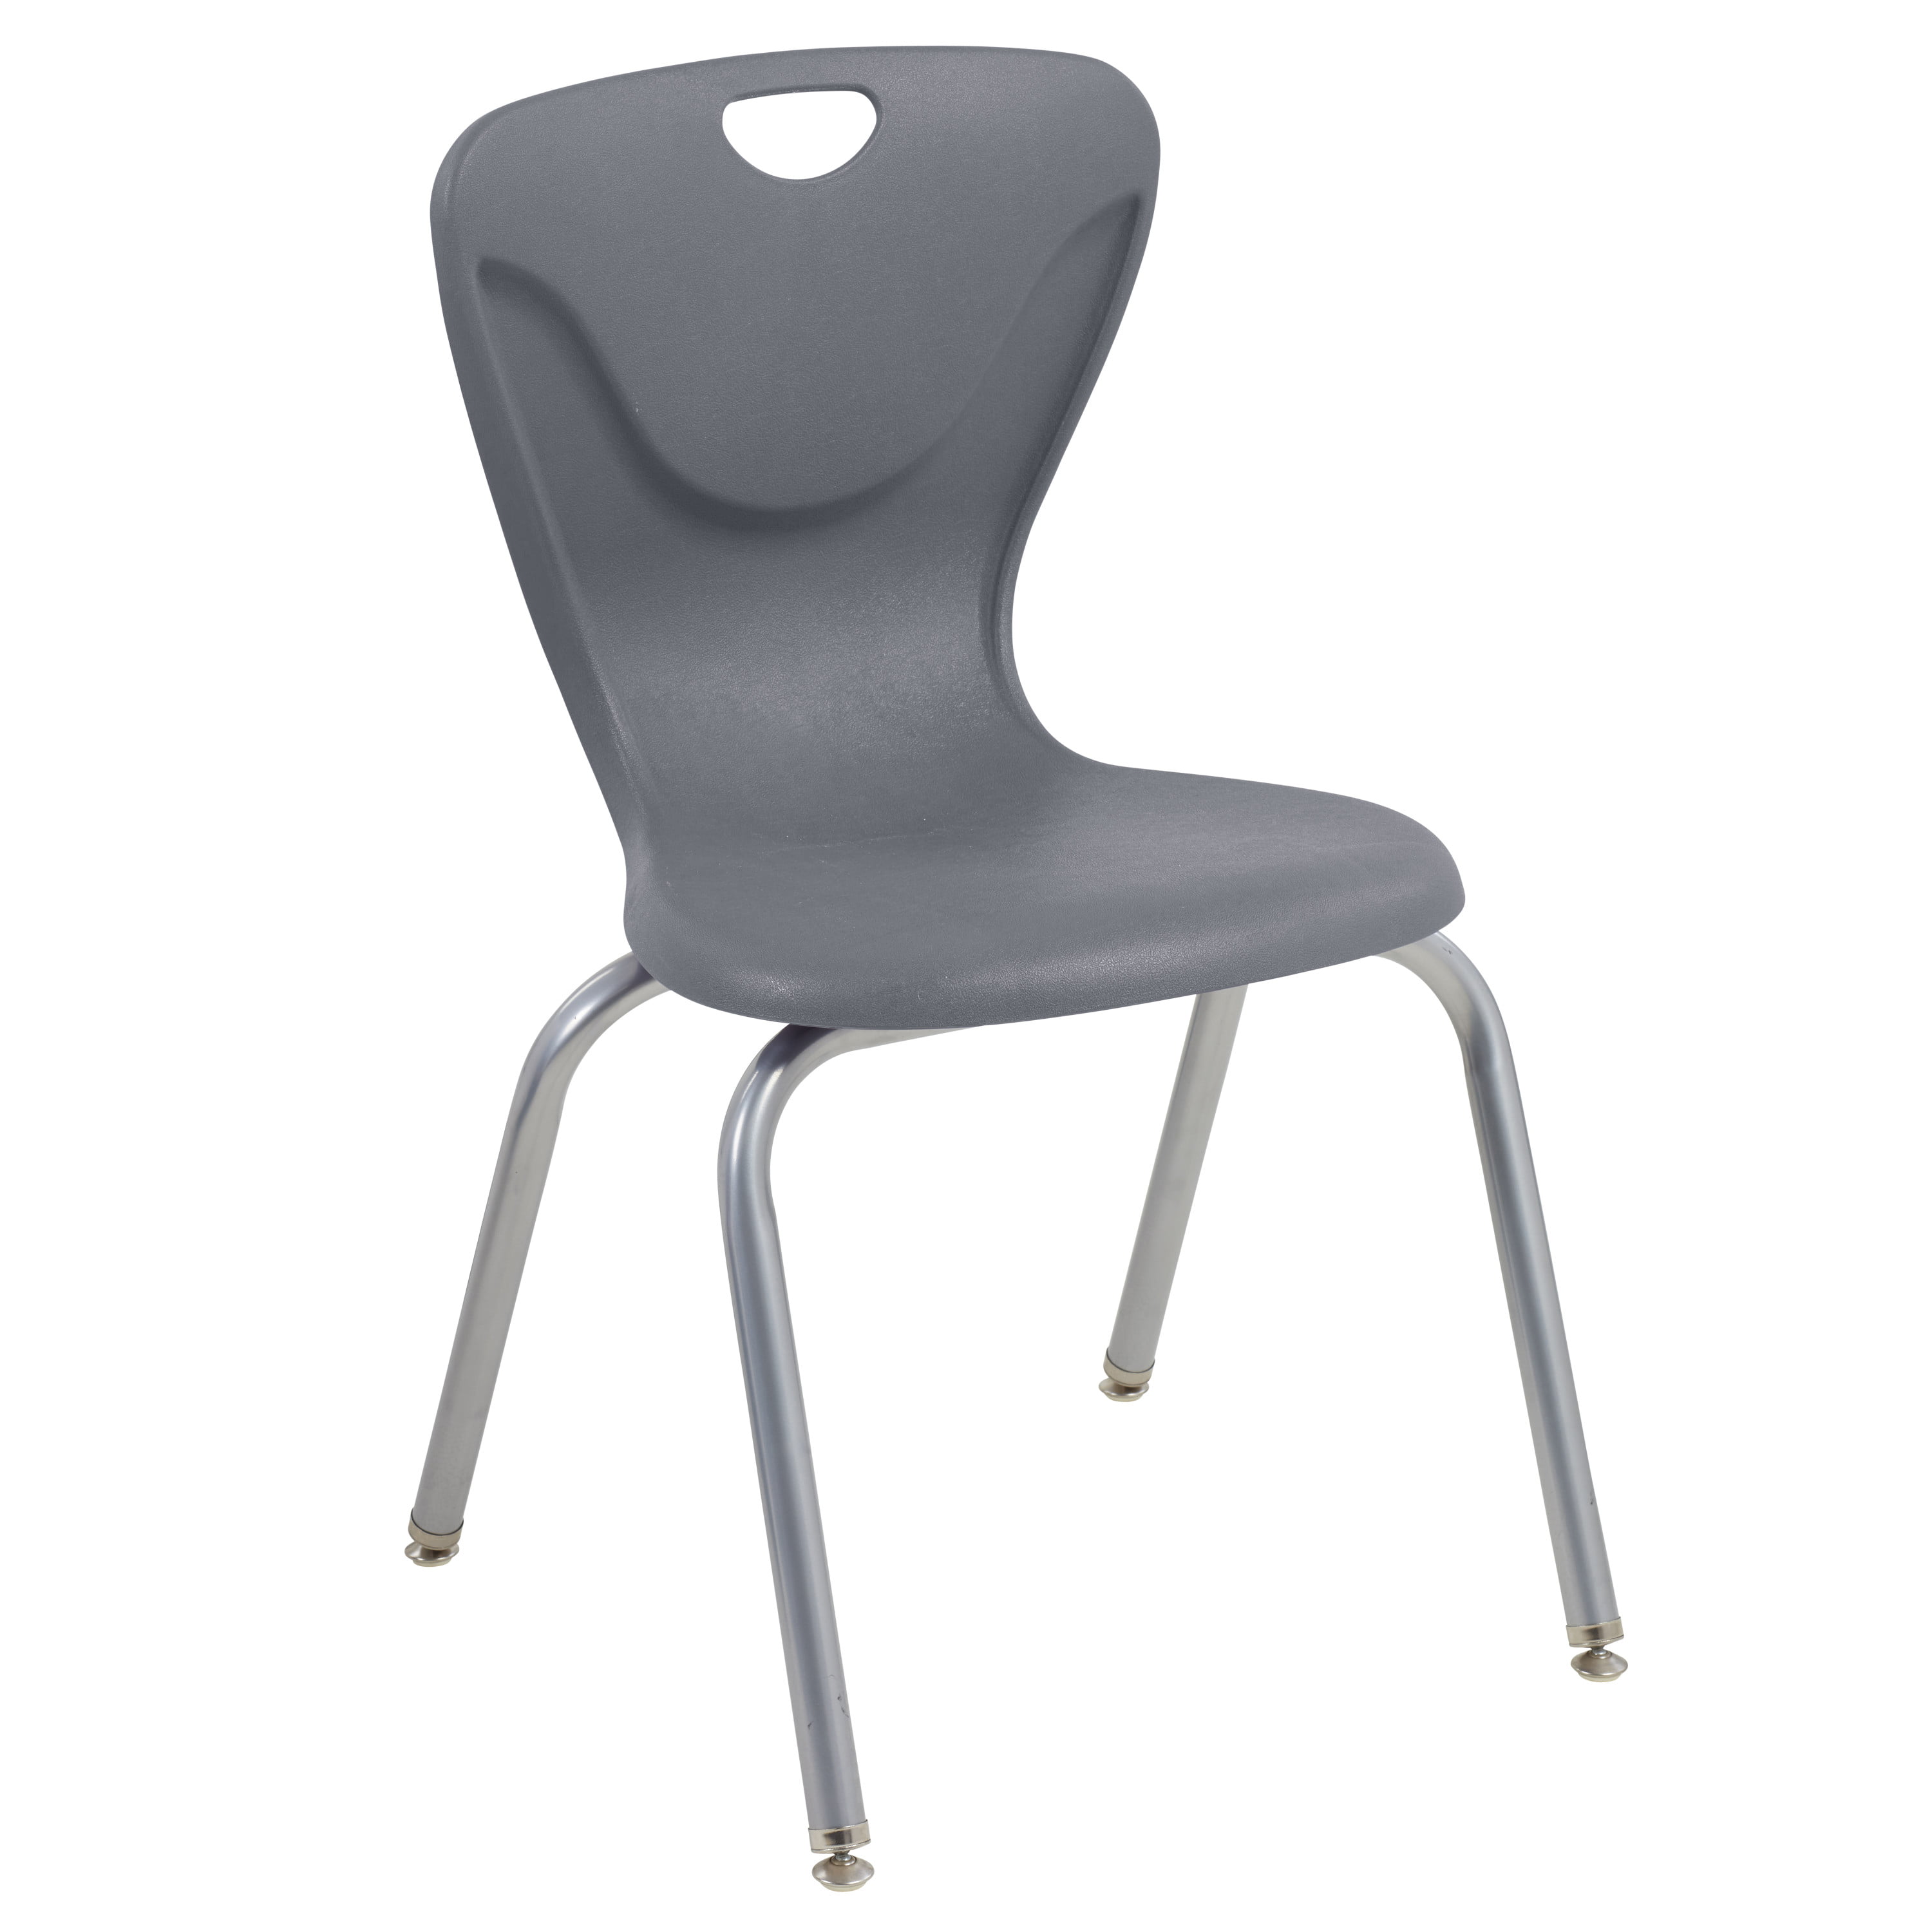 12in Contour Chair - Eggplant